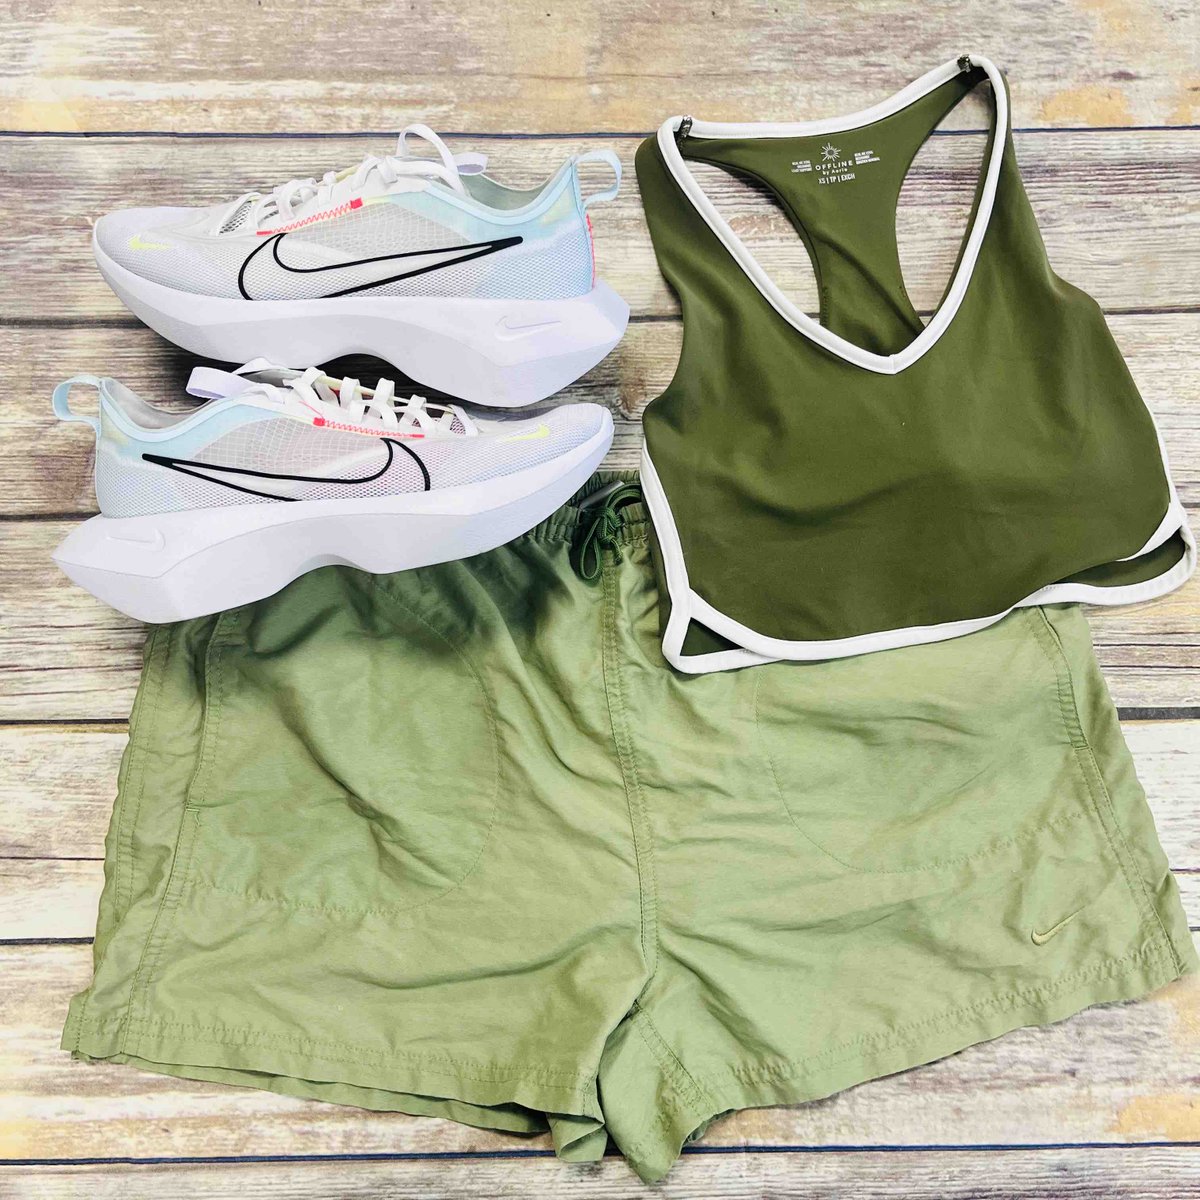 We’re always looking for trendy atheltic wear! Get same day cash for your style, any day of the week 😋
———
#gentlyused #athleticwear #prelovedfashion #brandsforless #outfitinspiration #outfitinspo